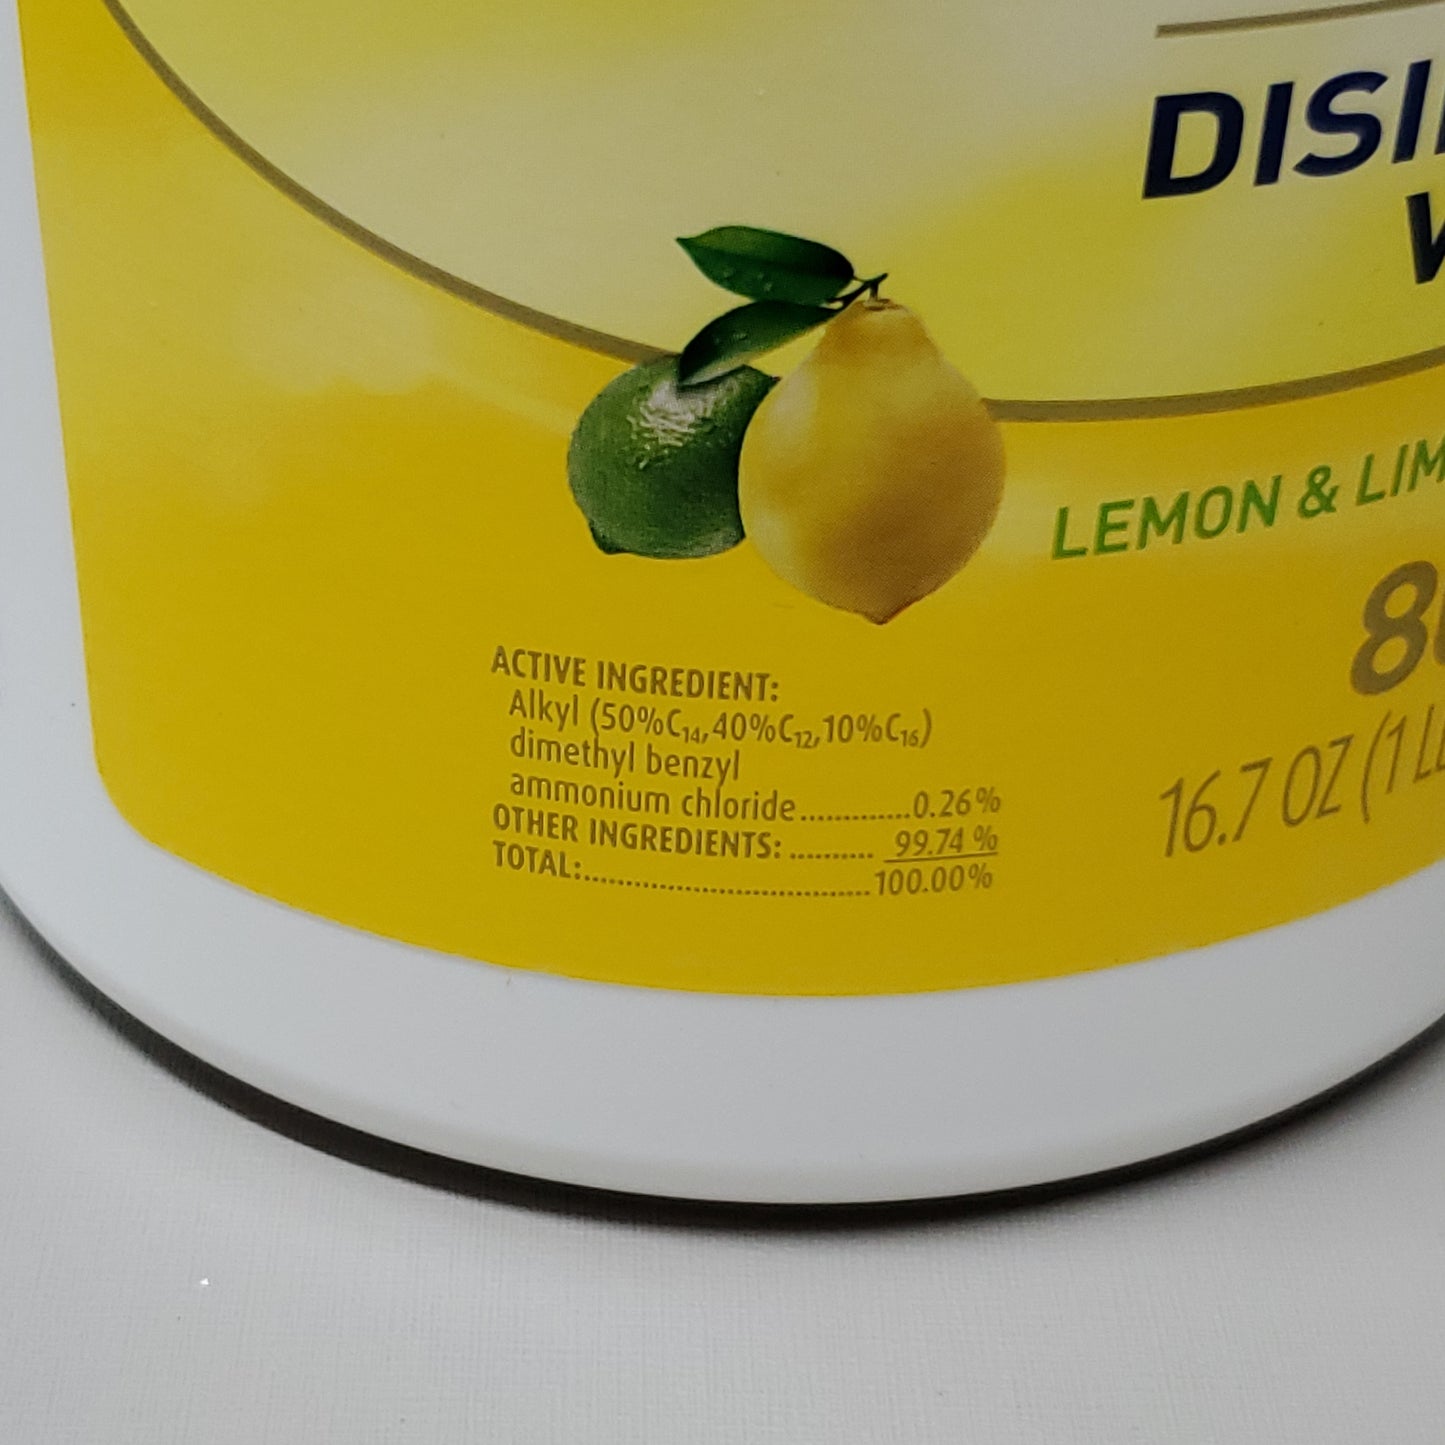 LYSOL 480 Disinfecting Wipes 6X80 Canister Packs Lemon & Lime Blossom Scent (New)